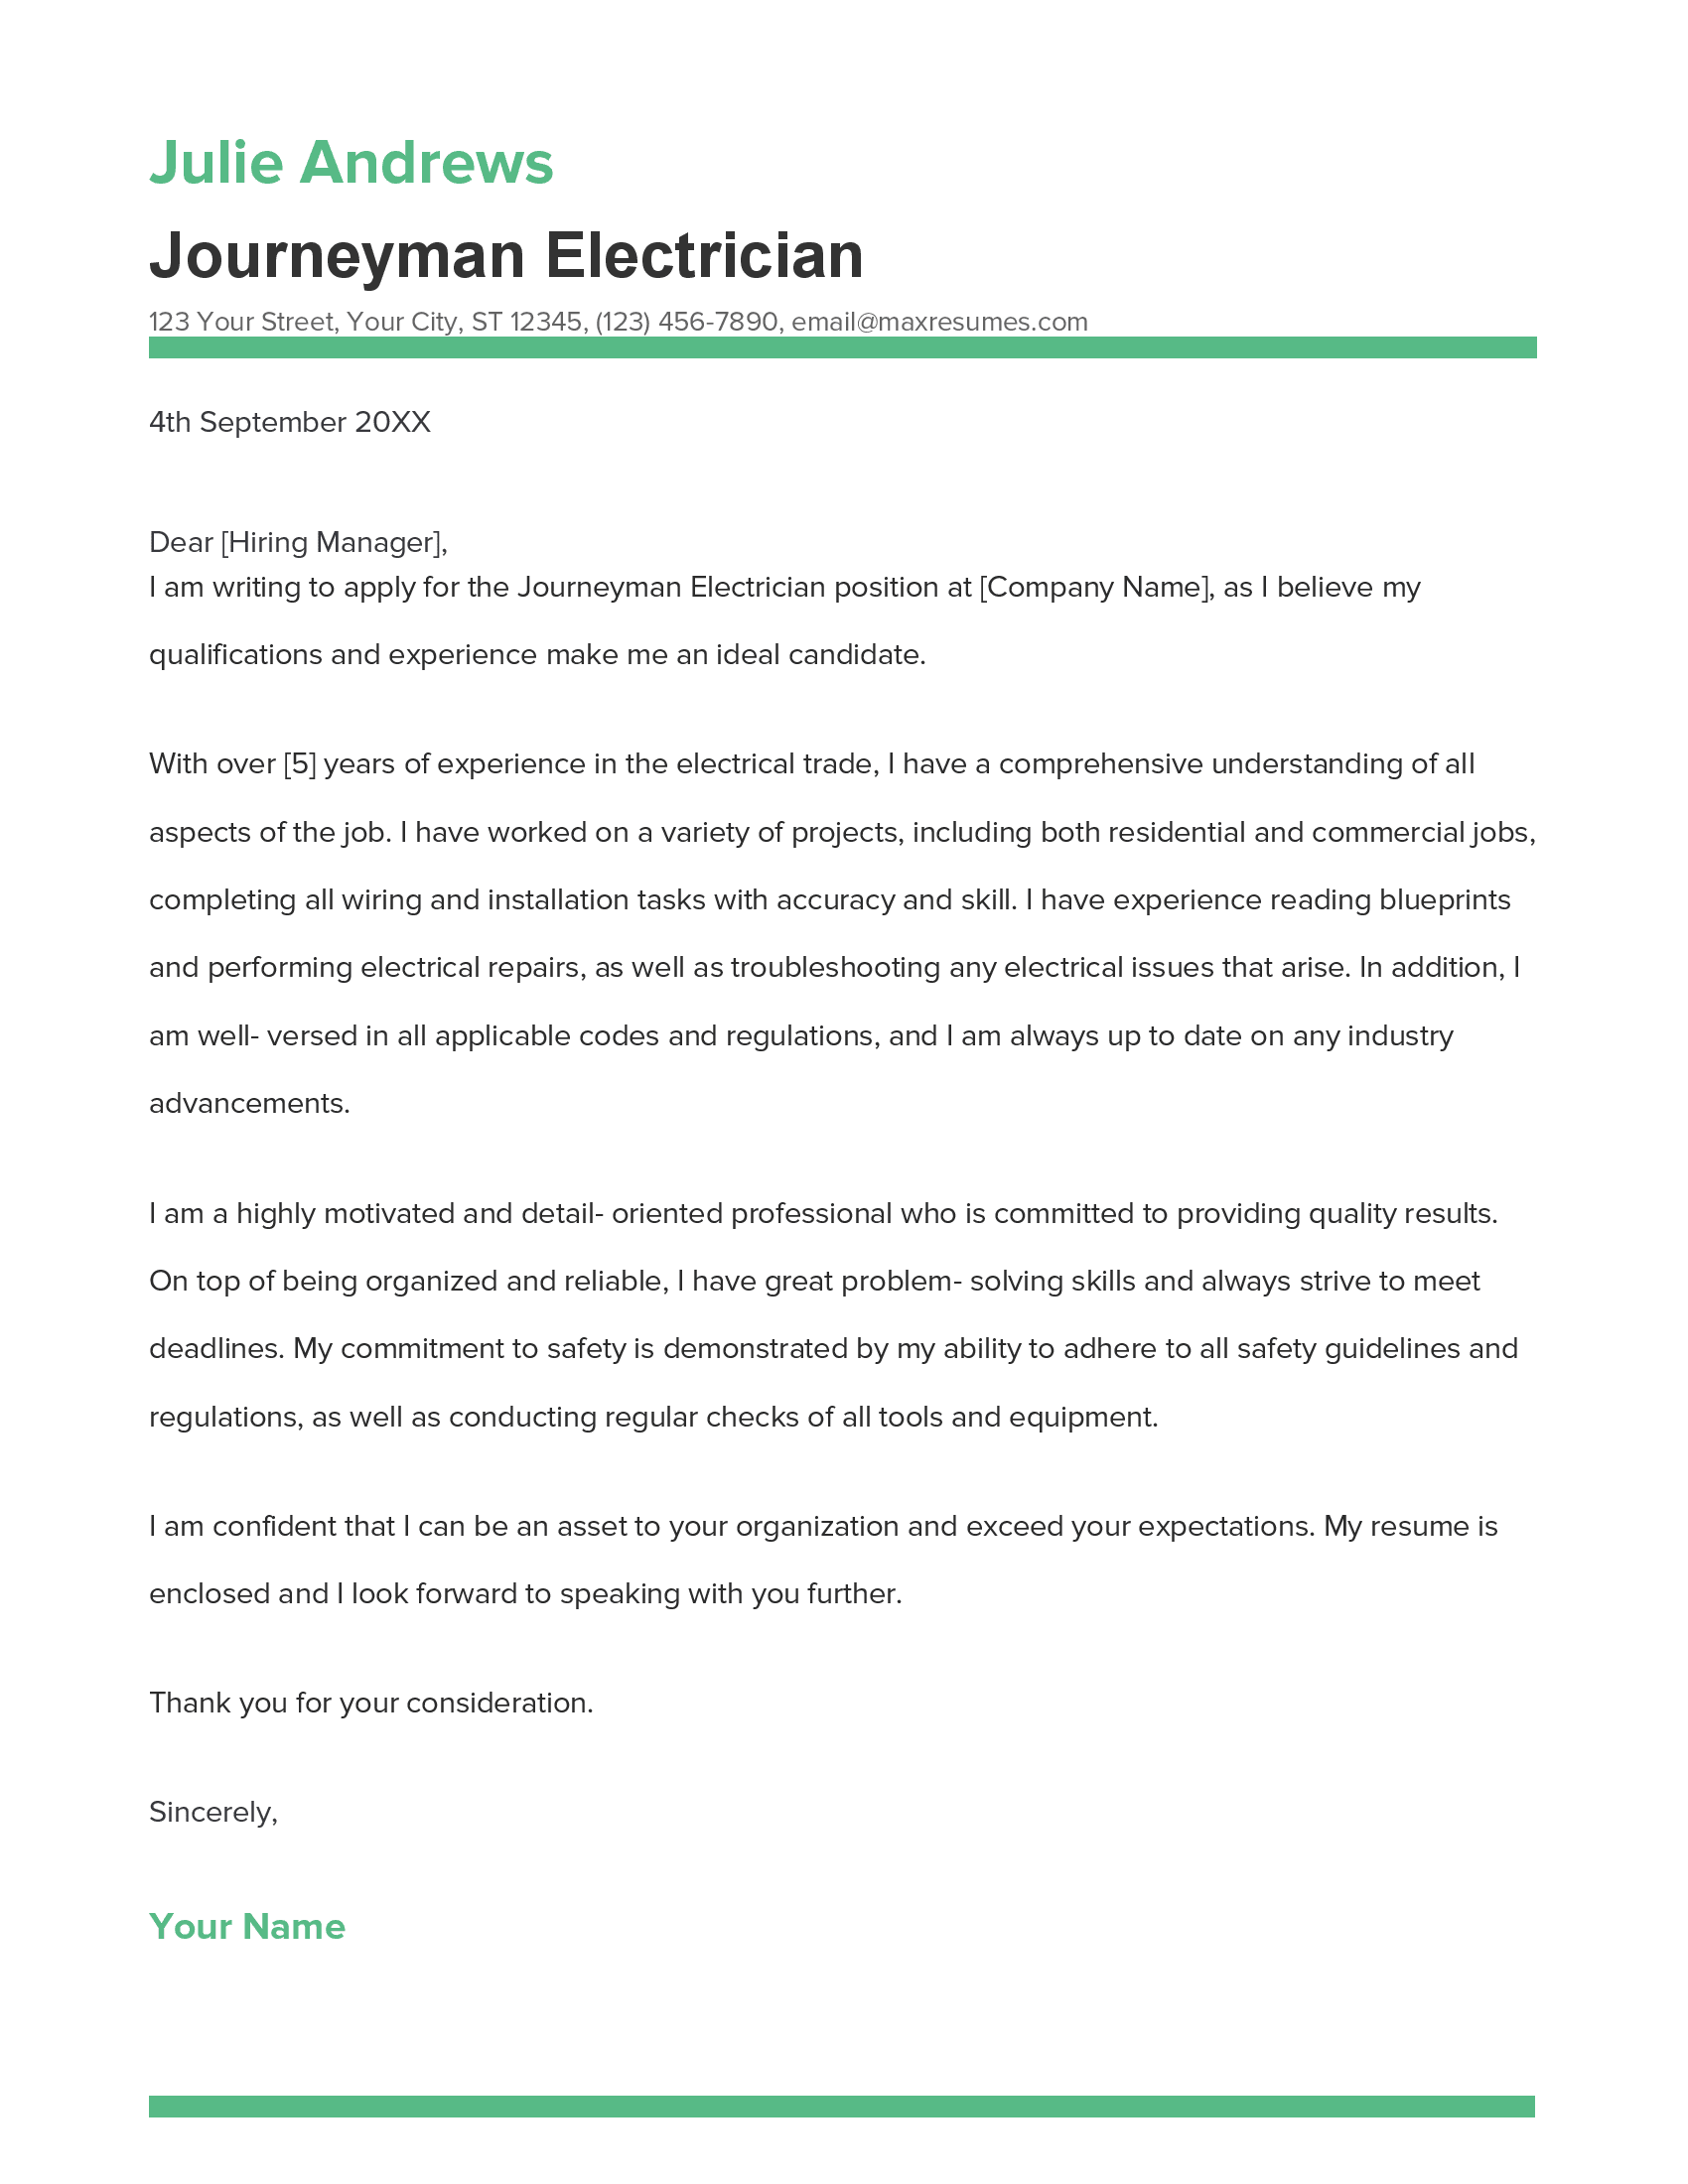 Journeyman Electrician Cover Letter Example